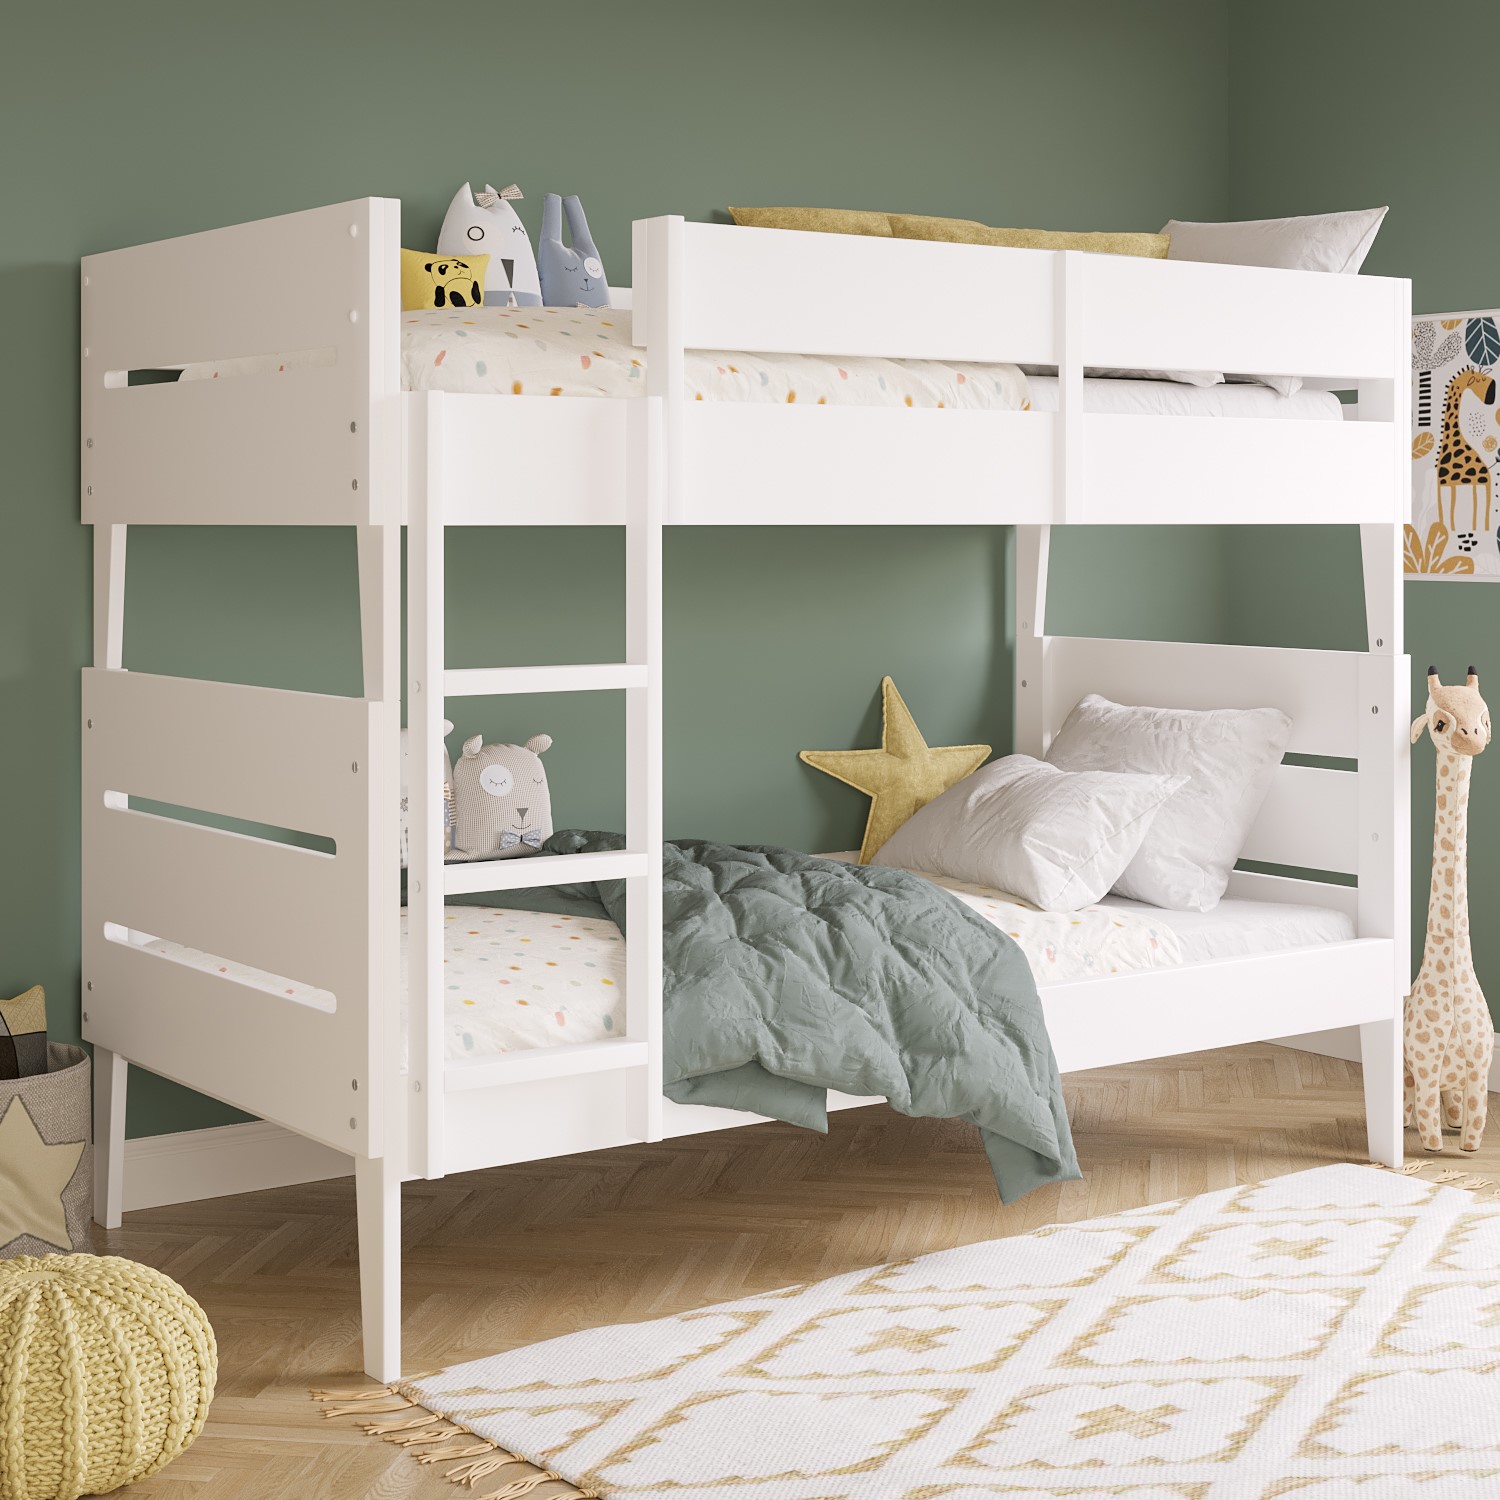 White Wooden Bunk Bed With Scandi, Wooden Bunk Beds With Mattresses Included